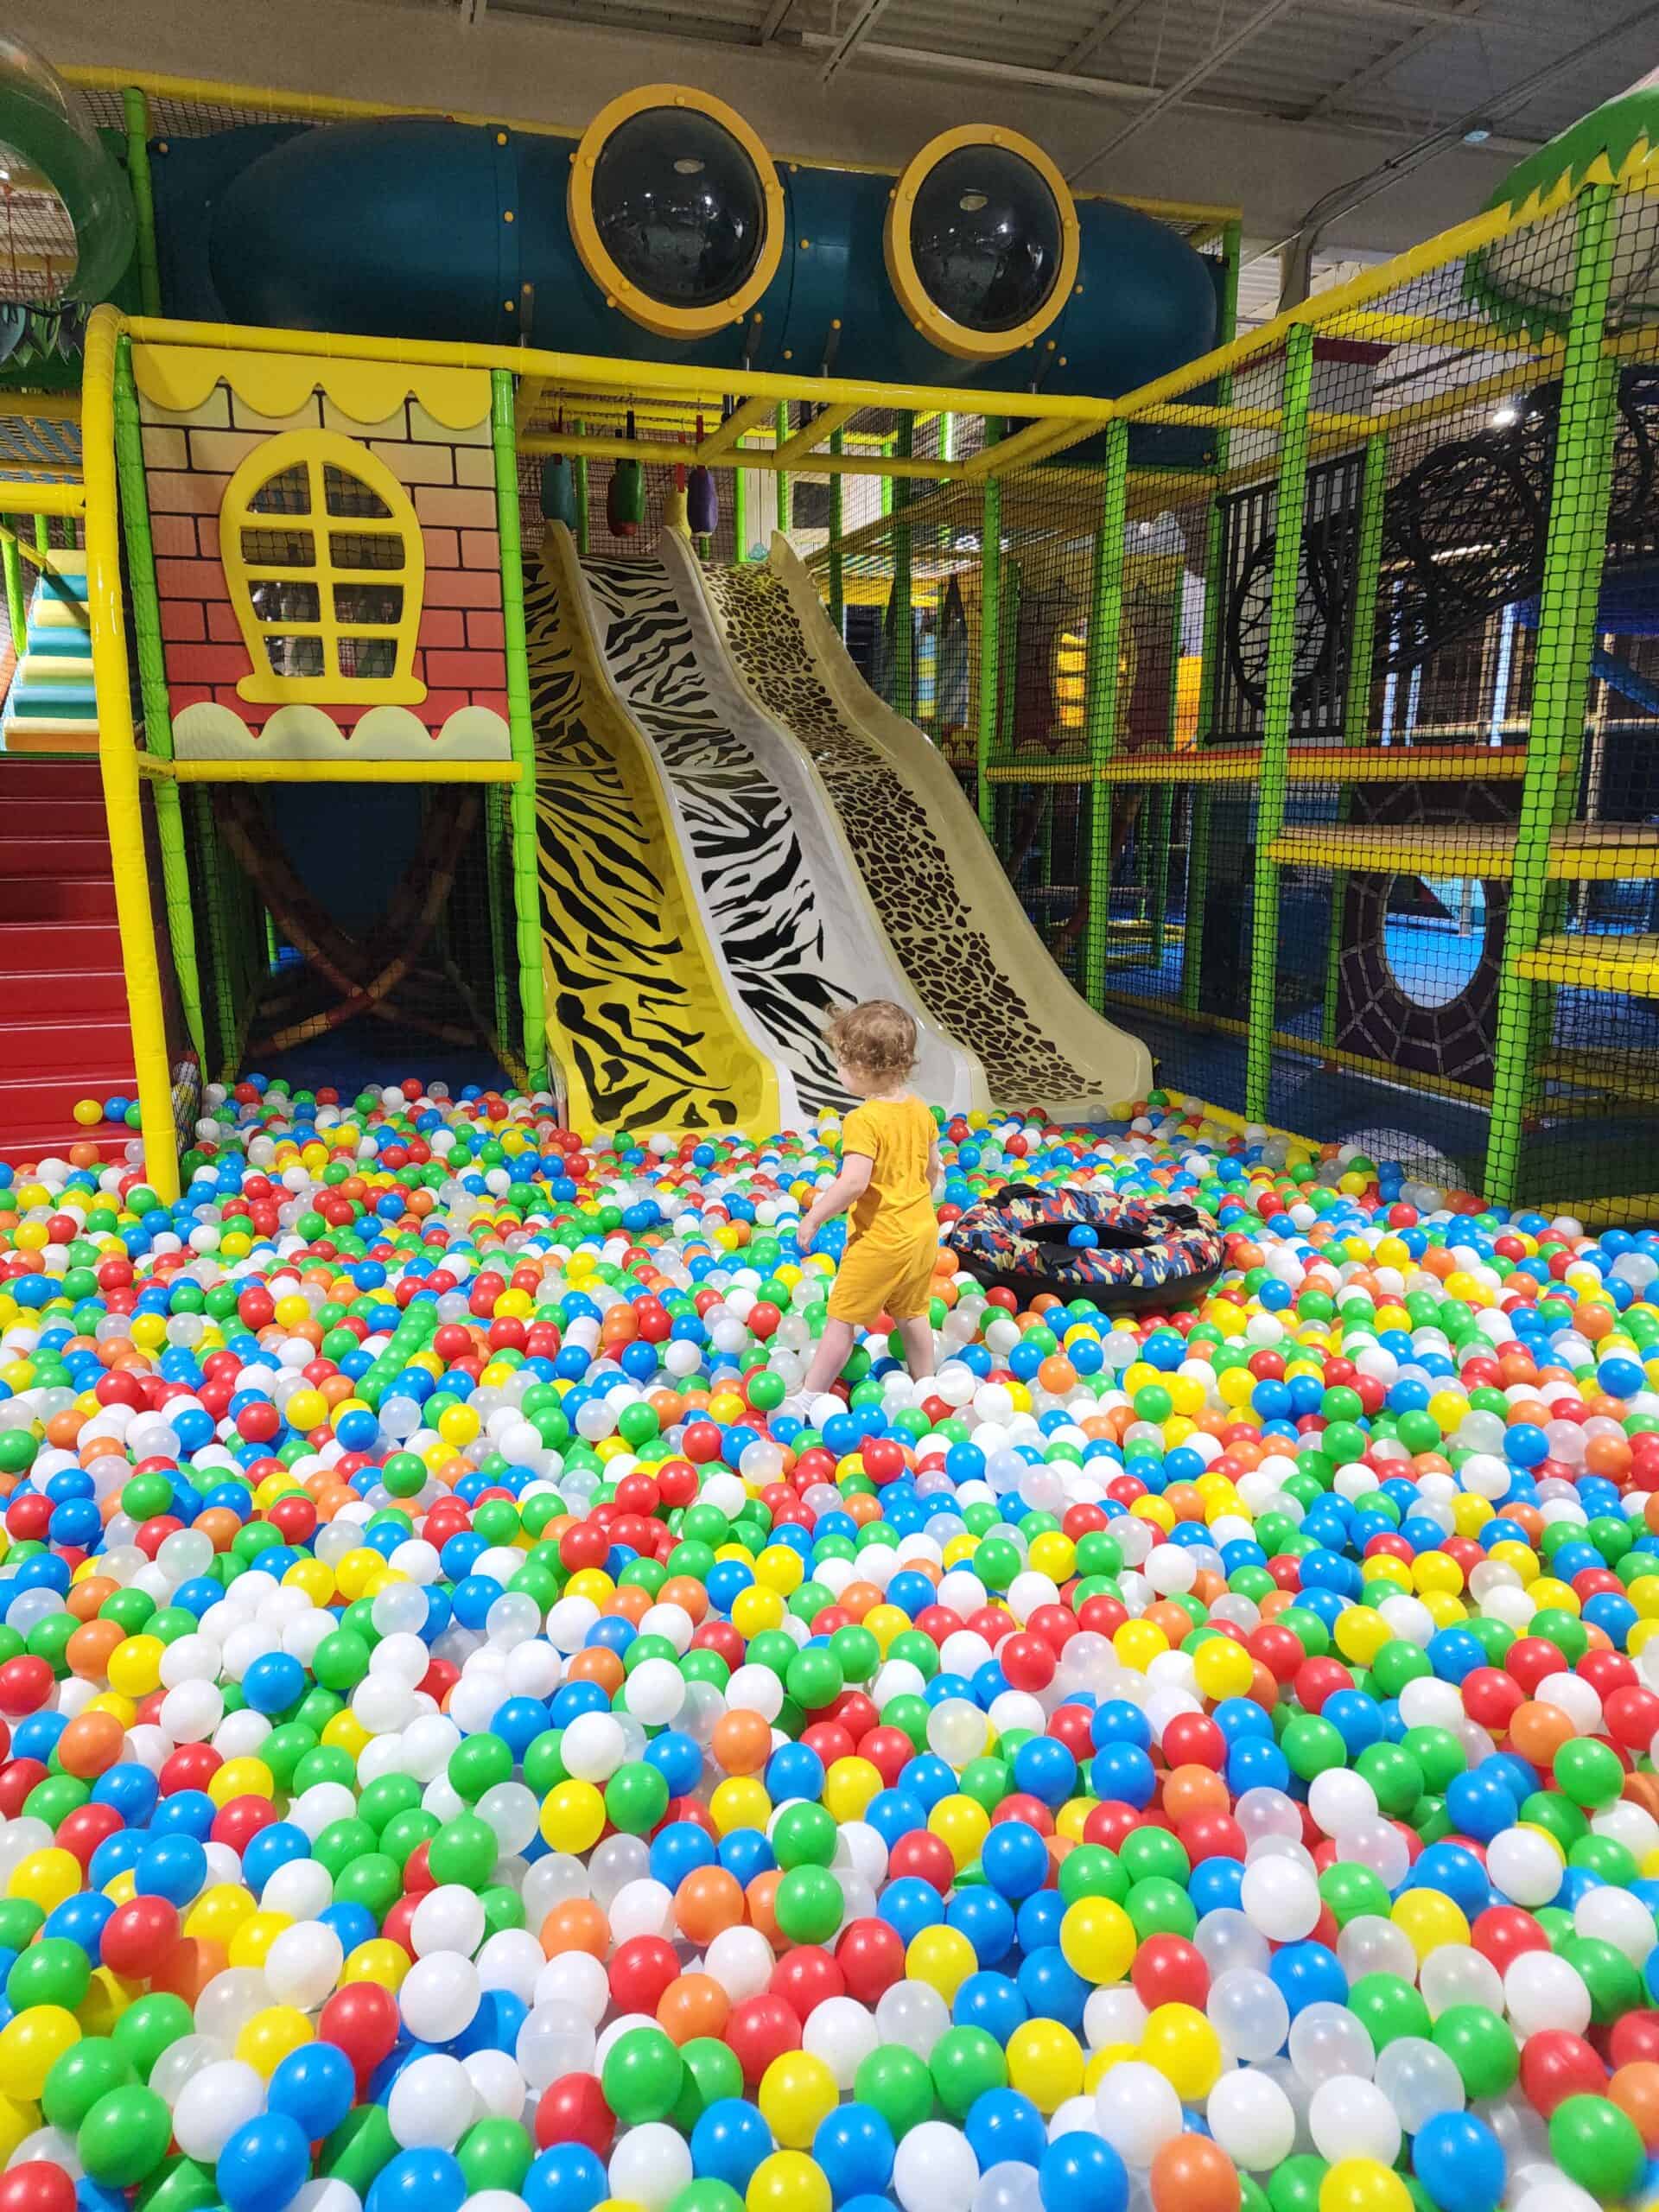 a huge colorful ballpit surrounds a soft play area for kids with animal print slides heading into it. A toddler walks through the ball pit toward the play area